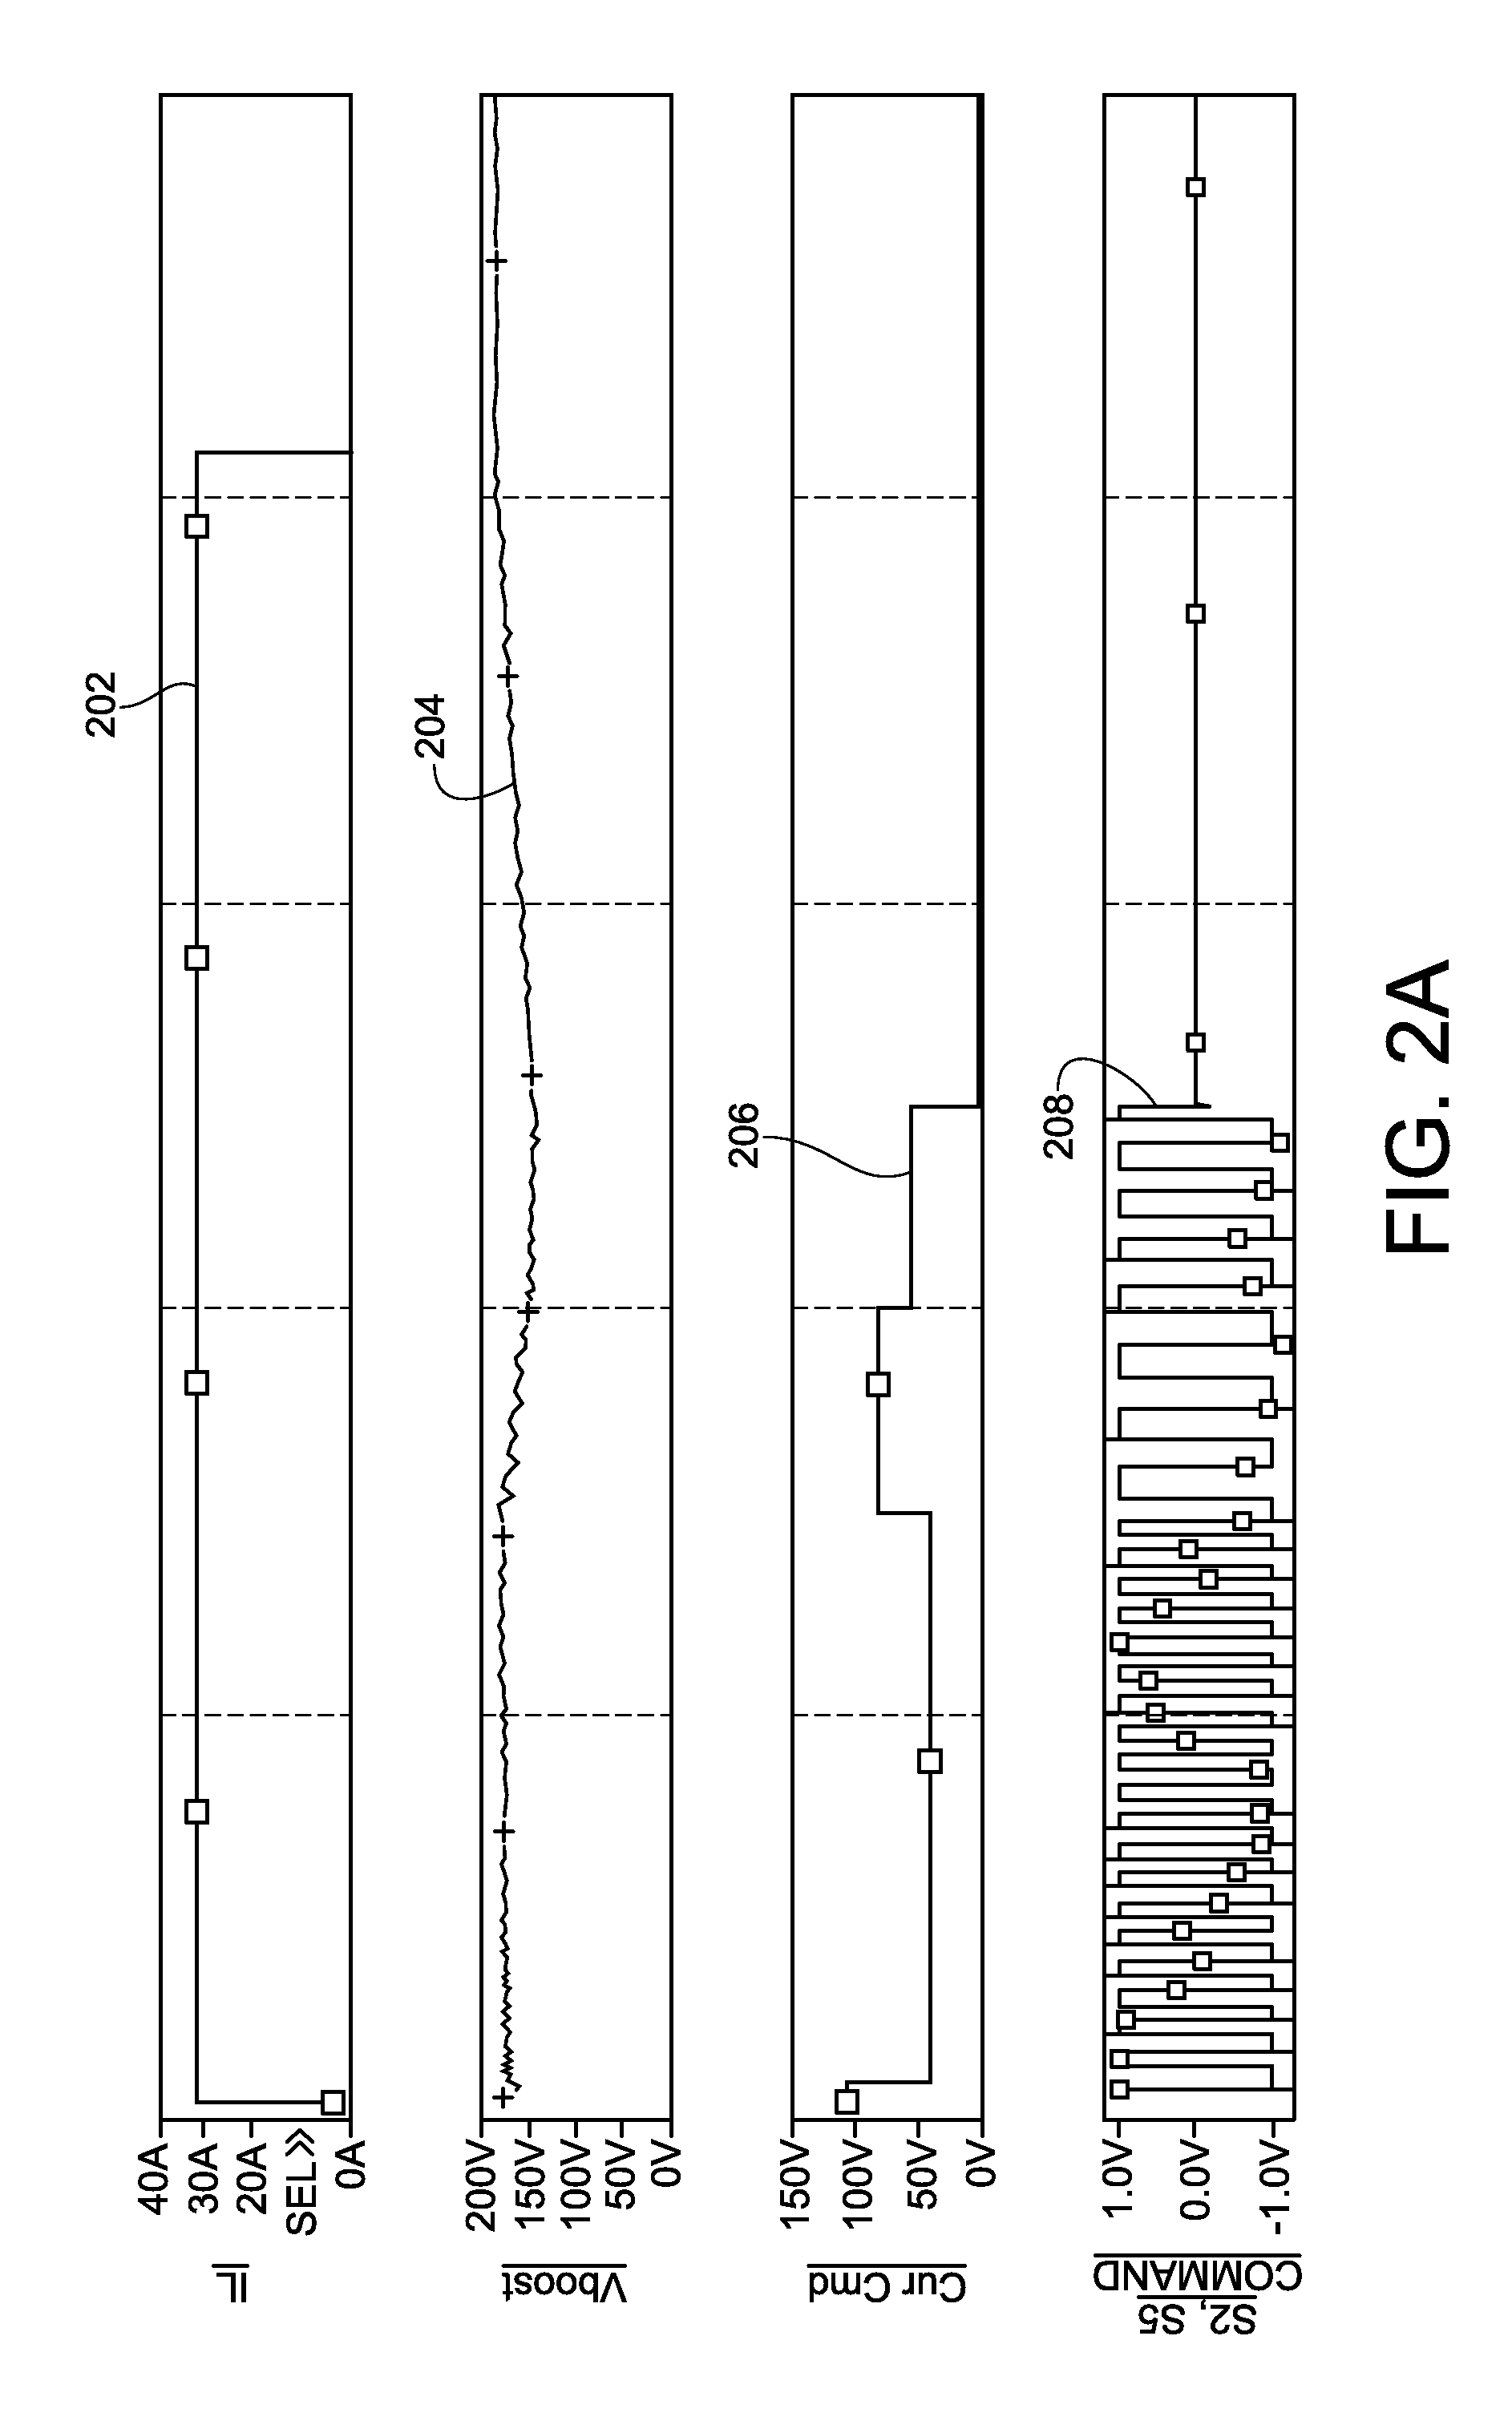 Multiplexing Drive Circuit For An AC Ignition System